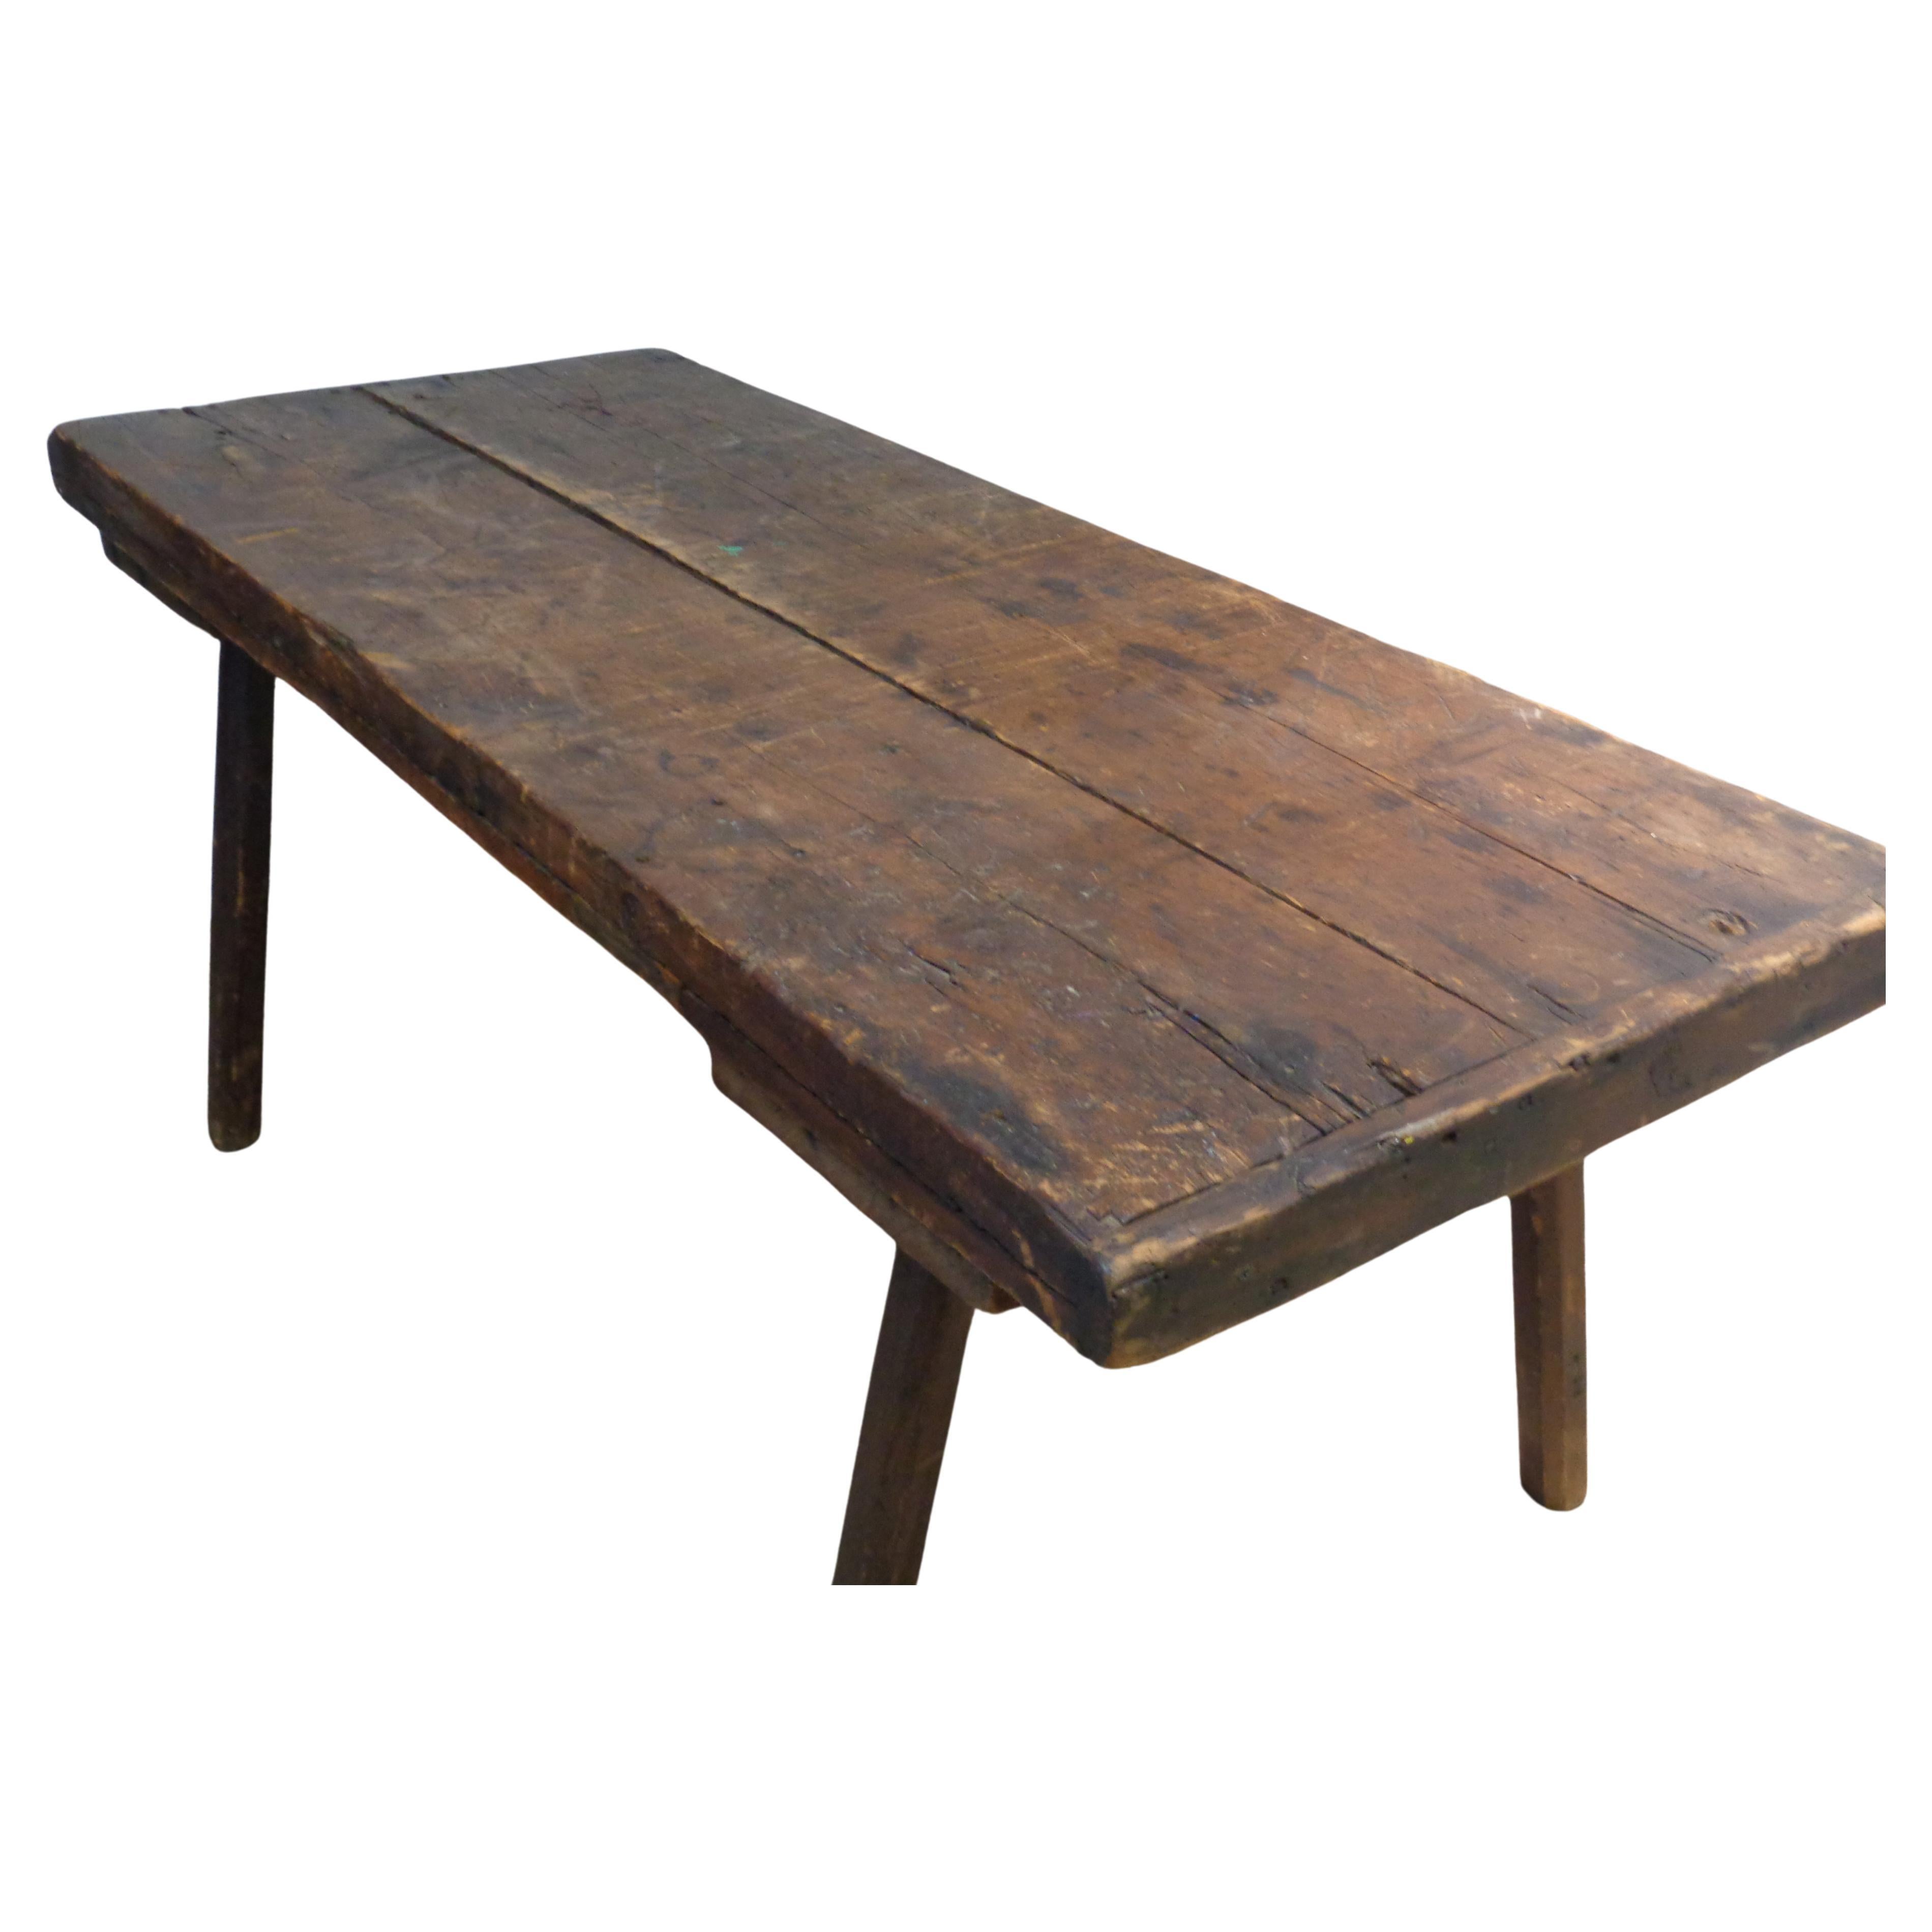 Antique 19th century American primitive butchers work table in overall perfectly aged original old surface color patina / three inch thick two board wood top w/ bread board ends is beautifully distressed from many years of actual use. Use as work